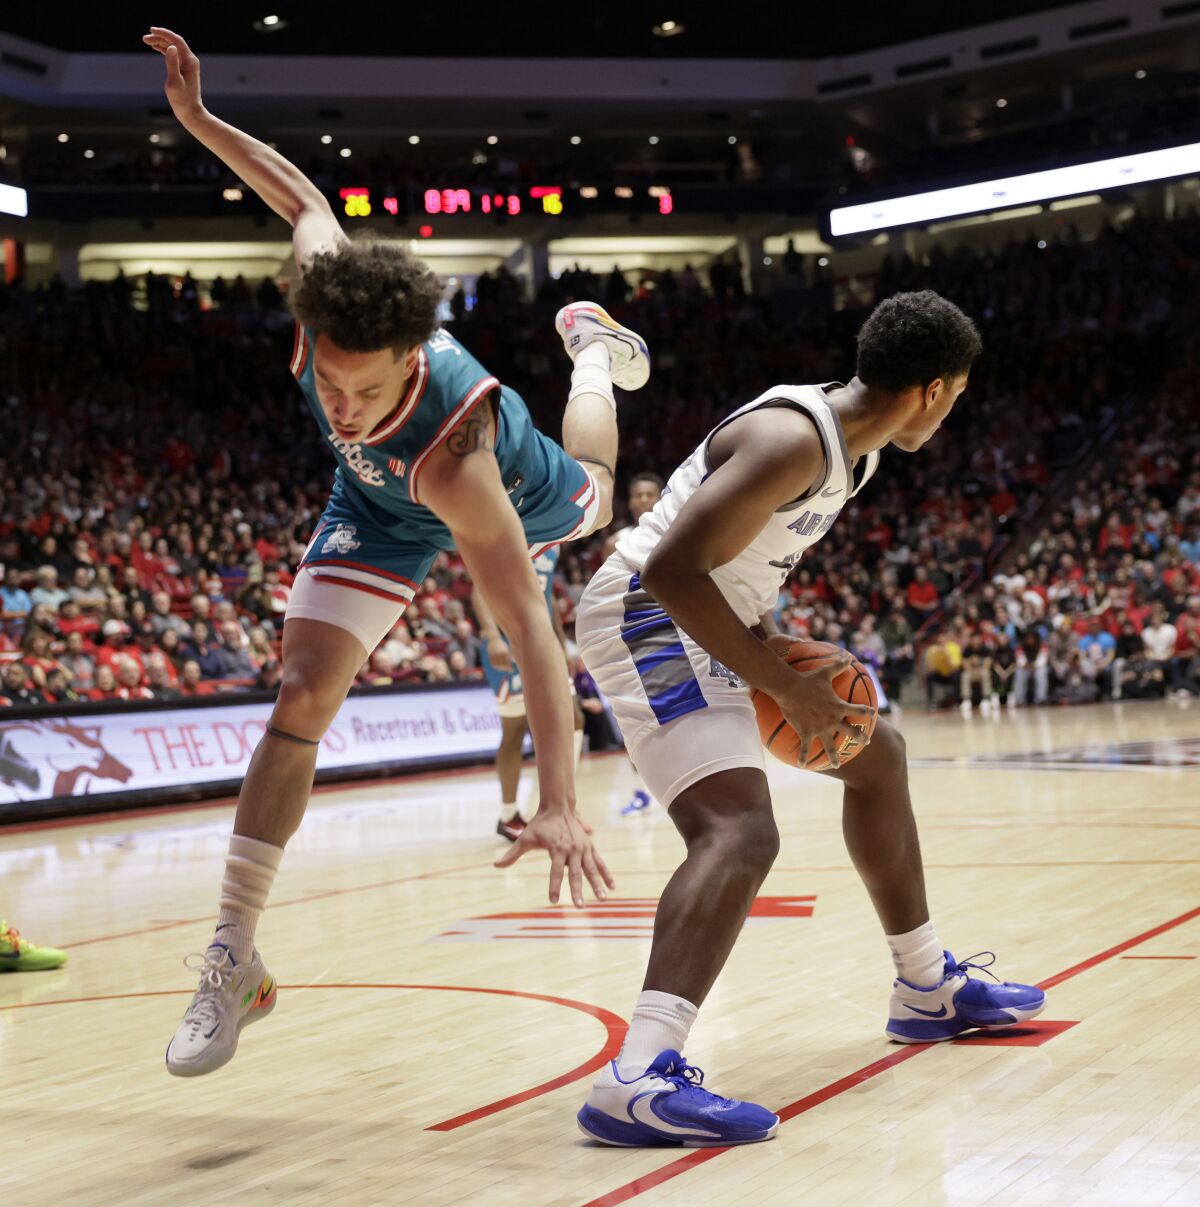 New Mexico's KJ Jenkins is thrown off balance while defending against Air Force guard Marcell McCreary during the first half of an NCAA college basketball game in Albuquerque, N.M., Friday, Jan. 27, 2023. (AP Photo/Eric Draper)